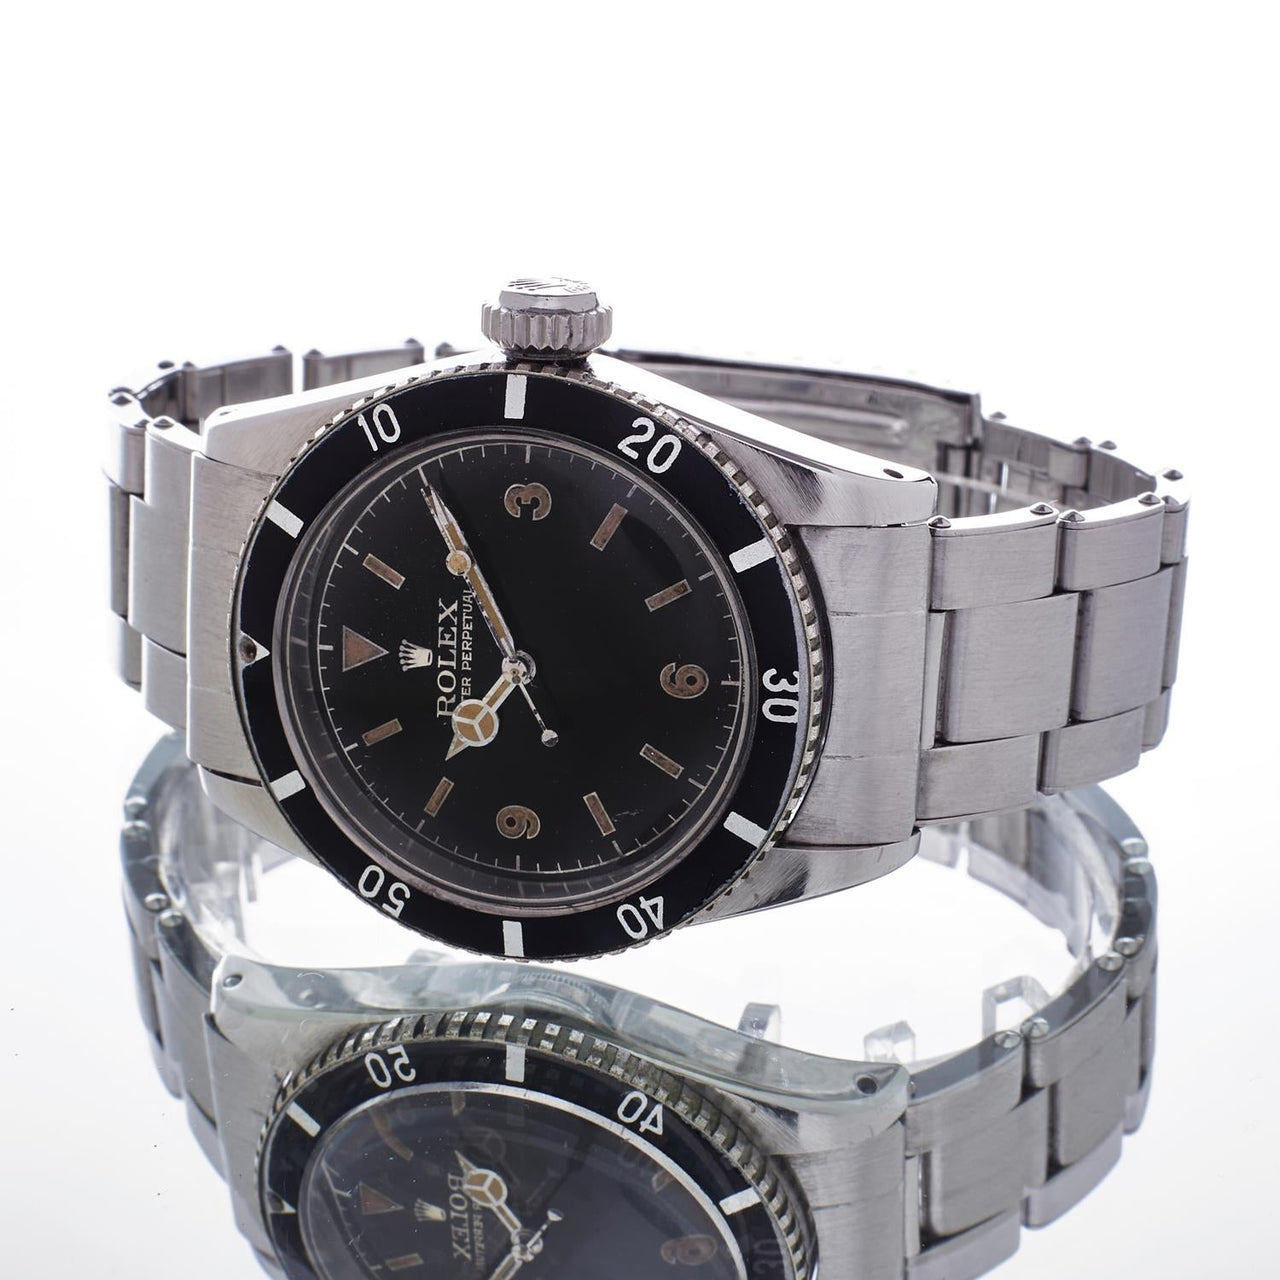 Pre-Owned Rolex Submariner 6538